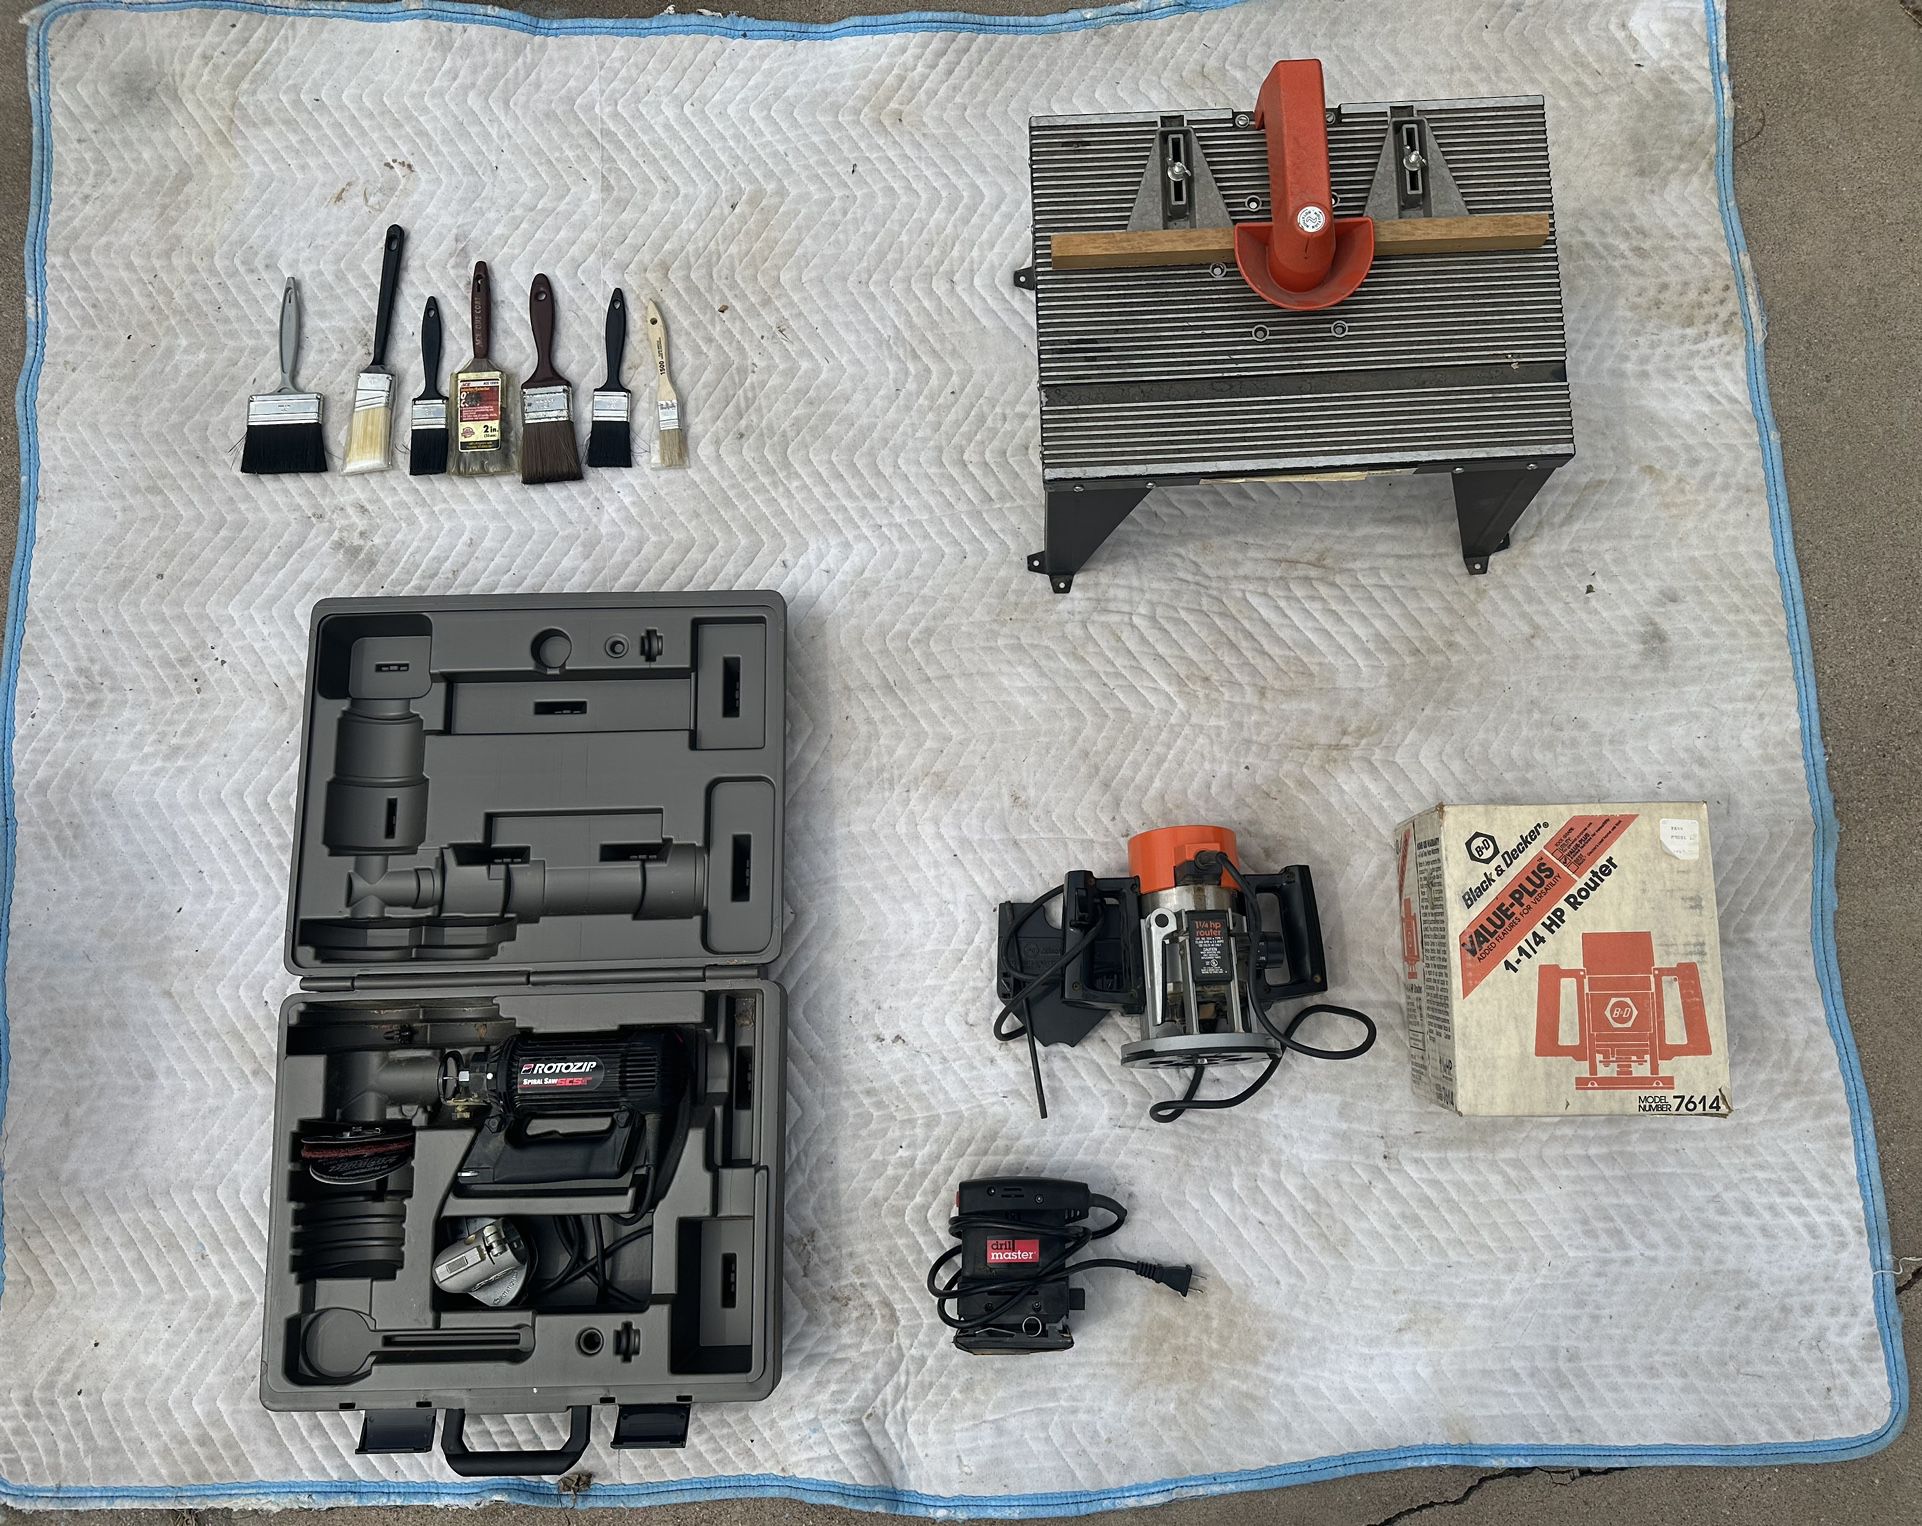 Lot 3- Router,  Router Table, spiral saw, hand sander, assorted brushes